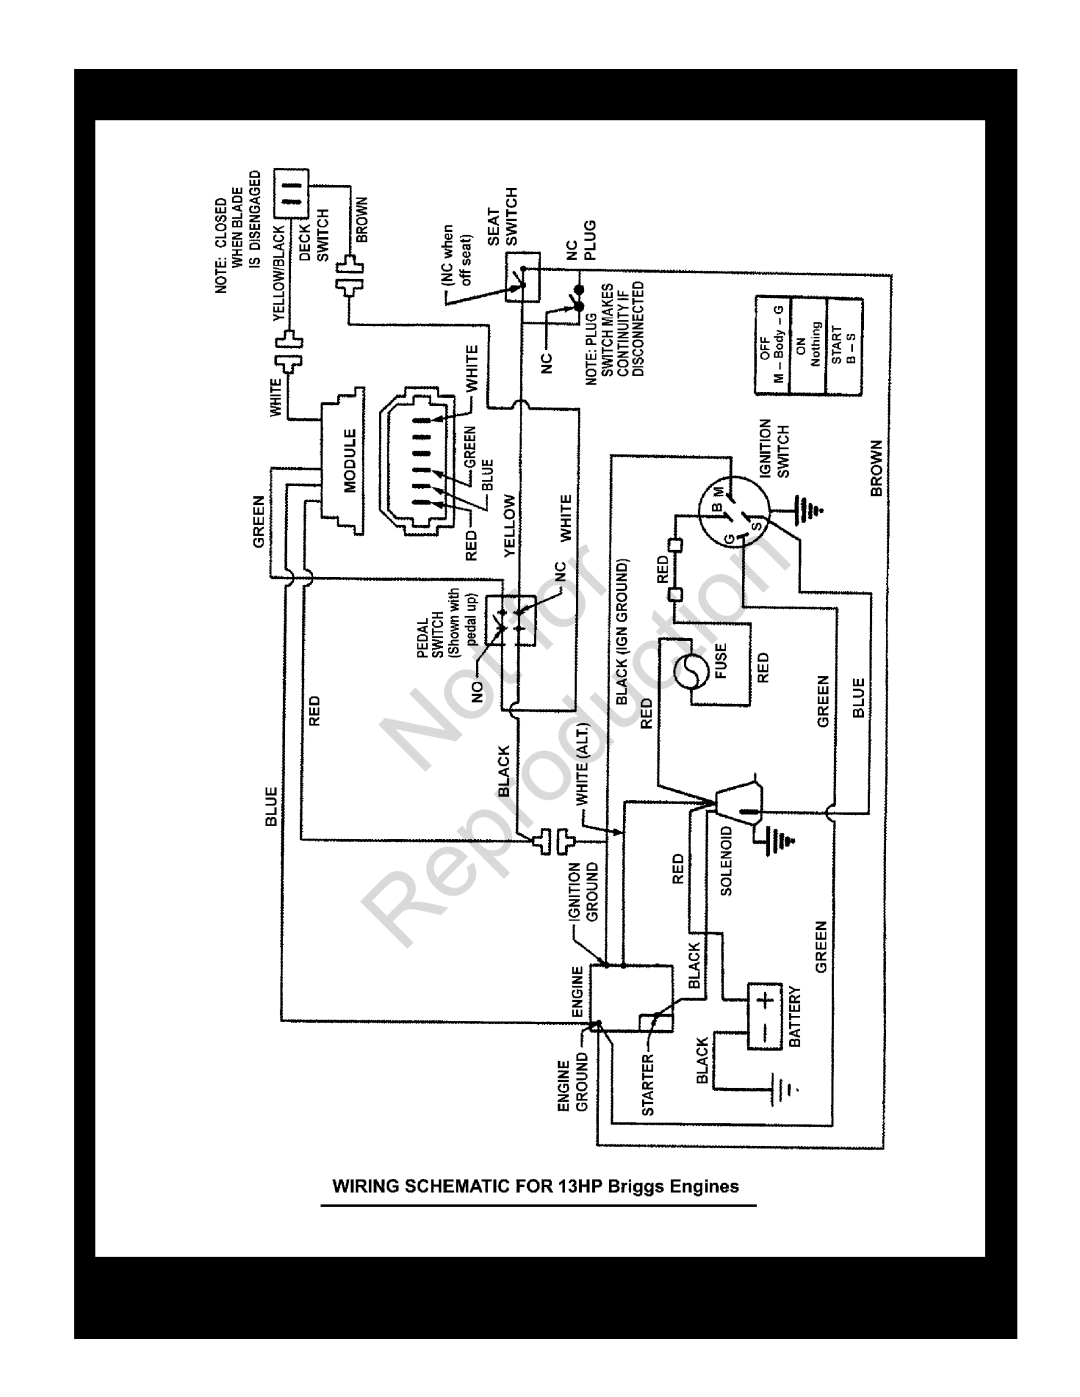 Snapper 84877, 84941, 85623, 84875 Wiring Schematic 13HP Briggs, Reproduction, Manual No, 7006278, Standard Deck, Series 